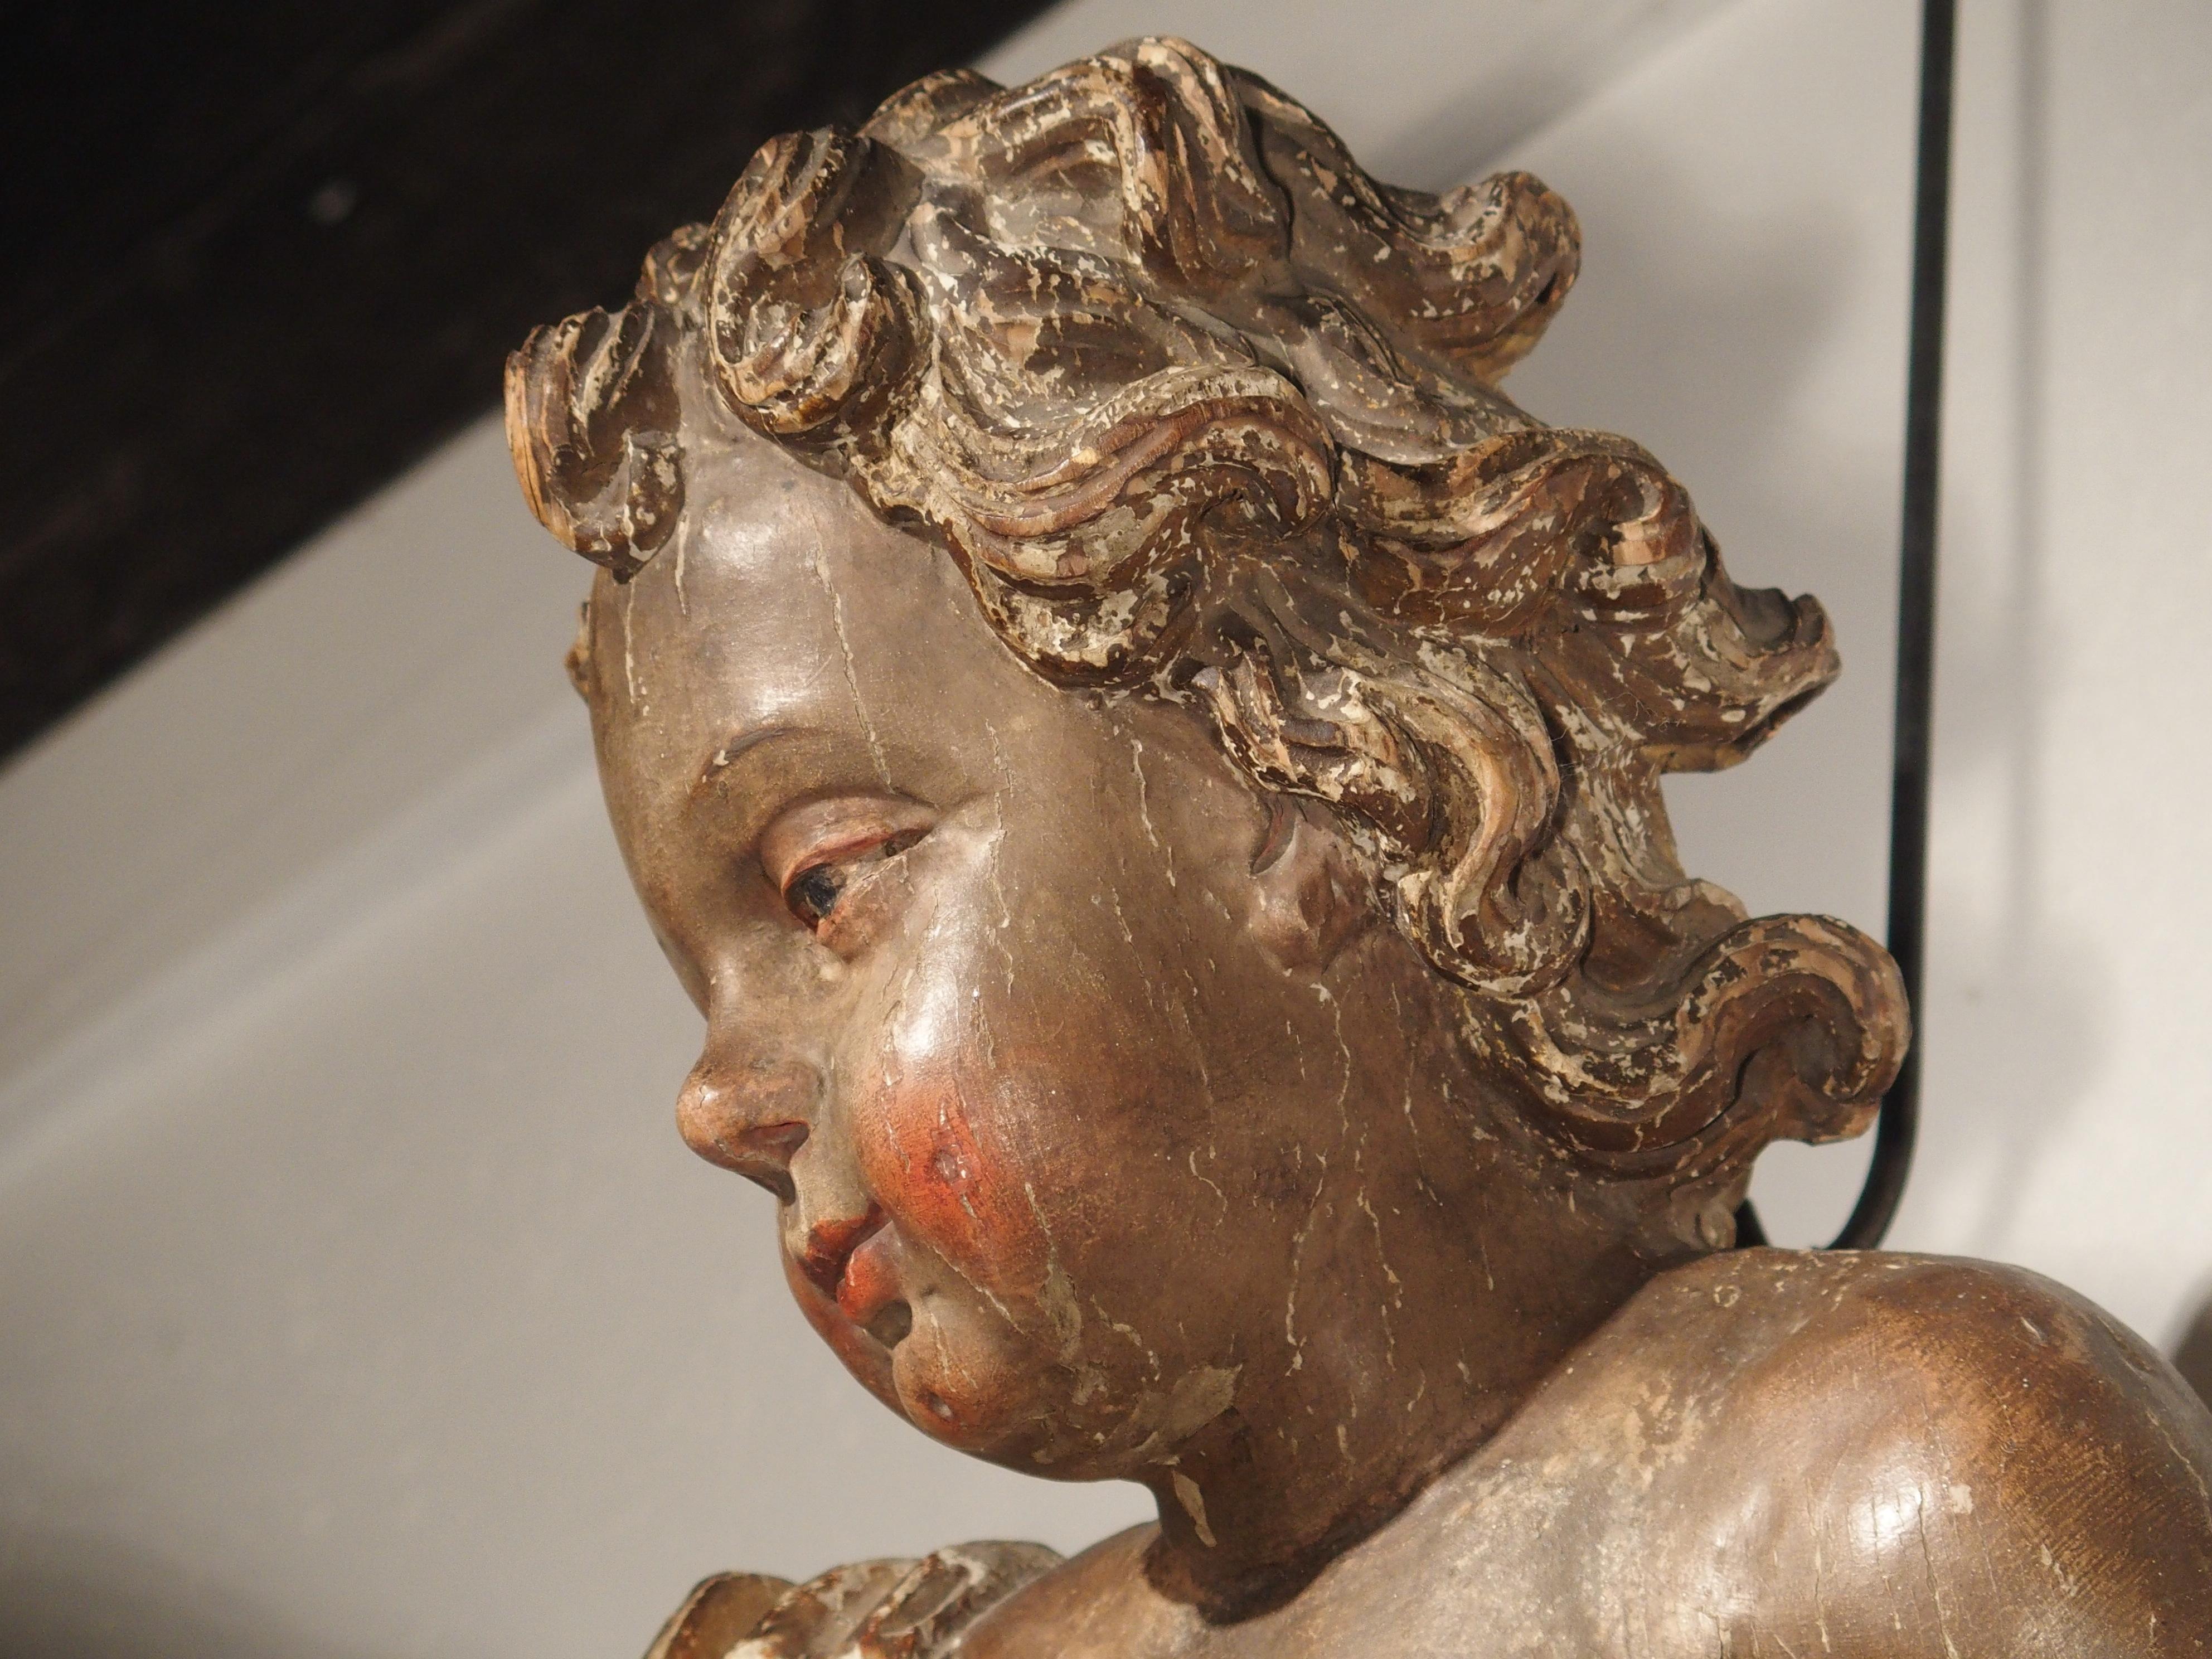 This large polychrome and giltwood cherub was produced in Italy in the 1700’s. In religion, cherubim are angels of the second highest order that serve God. During the early Renaissance and Baroque periods, artists such as Donatello began to